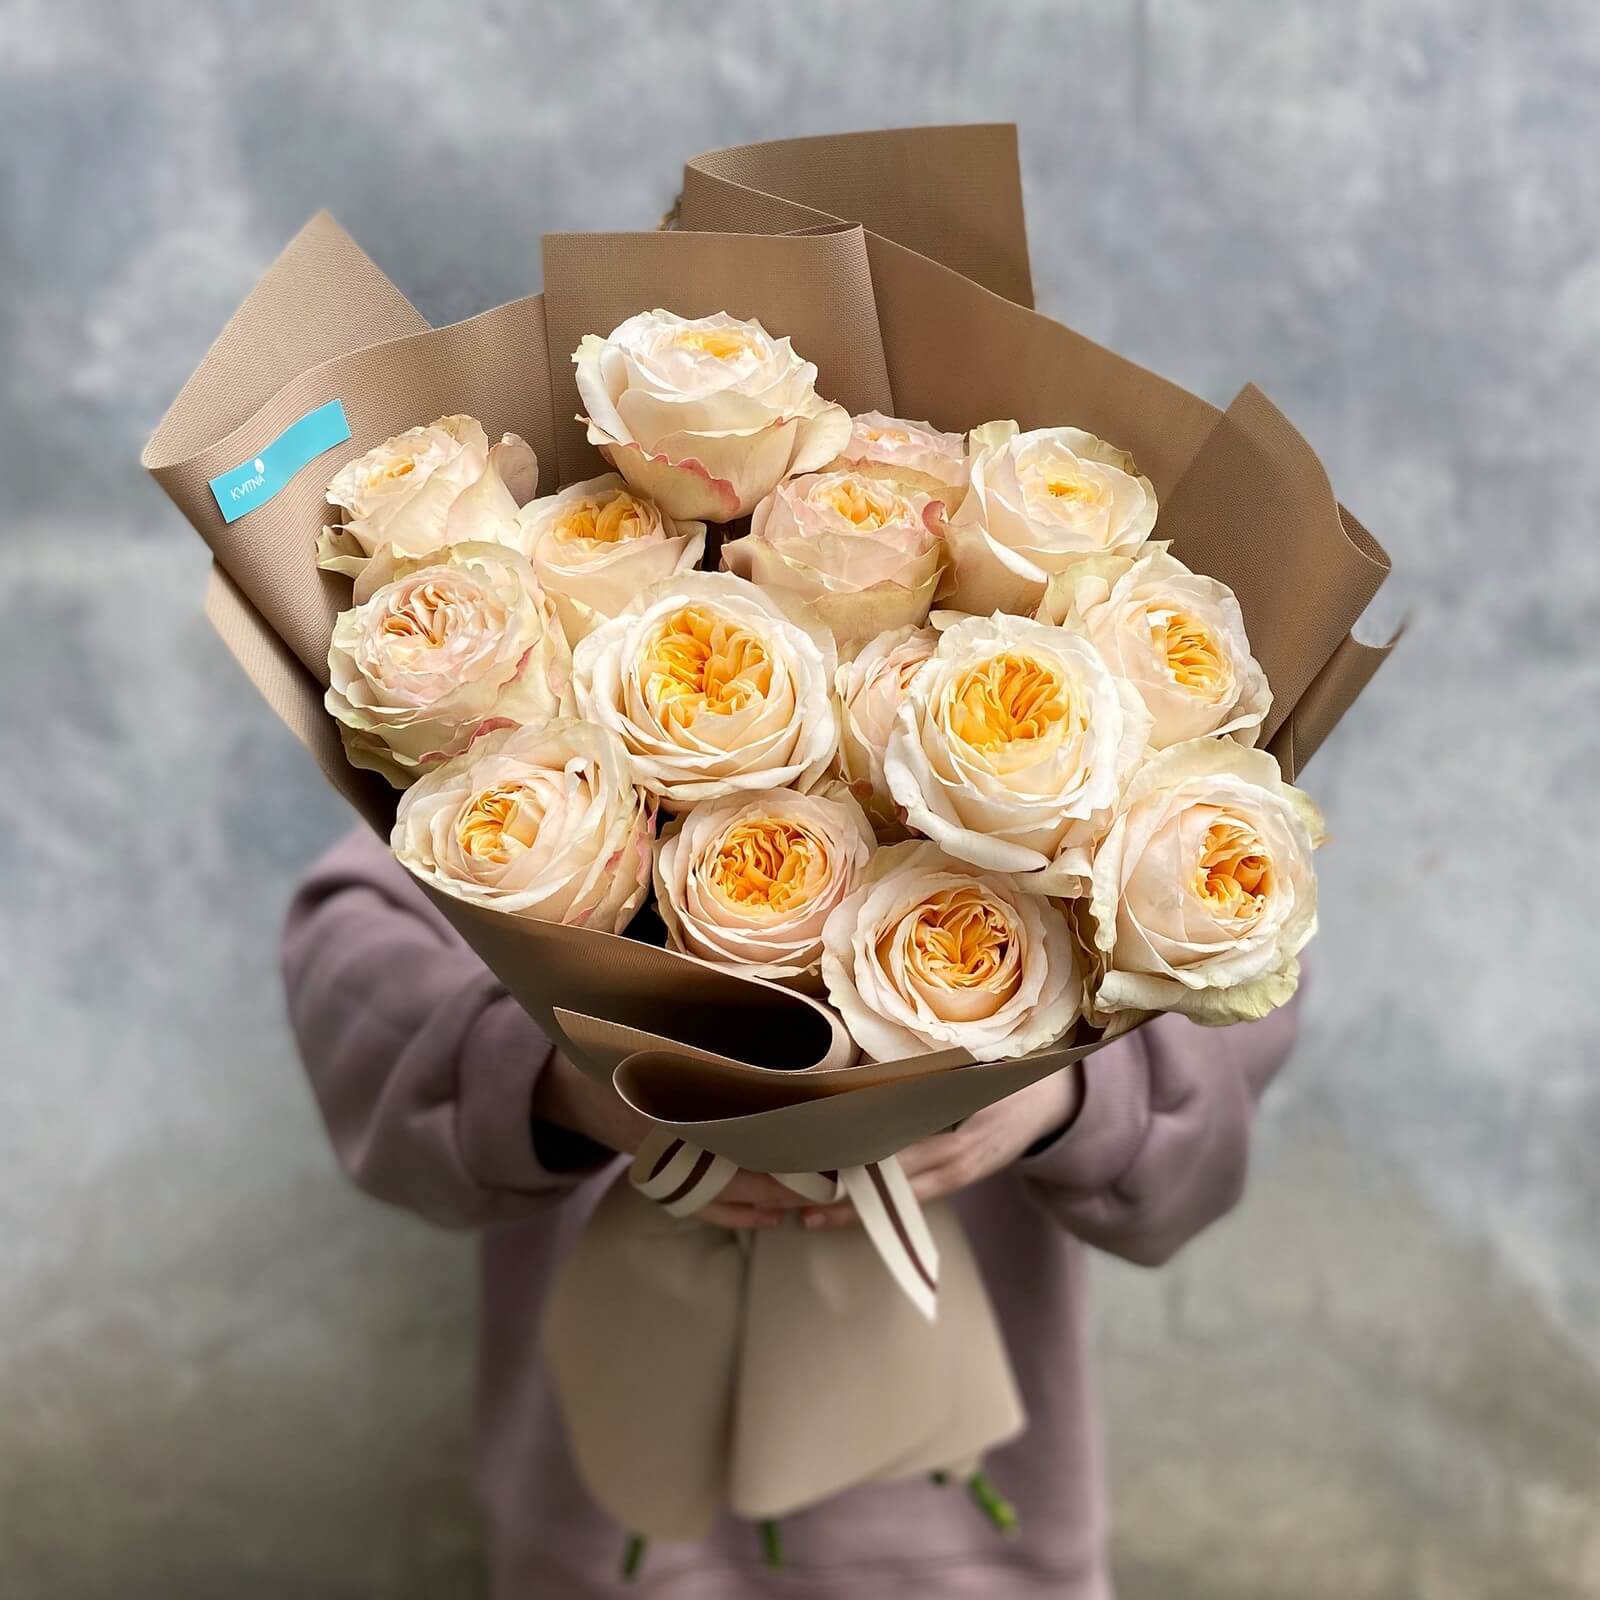 Peony rose «Victorian Peach» delivery to Lviv - Kvitna - Rose